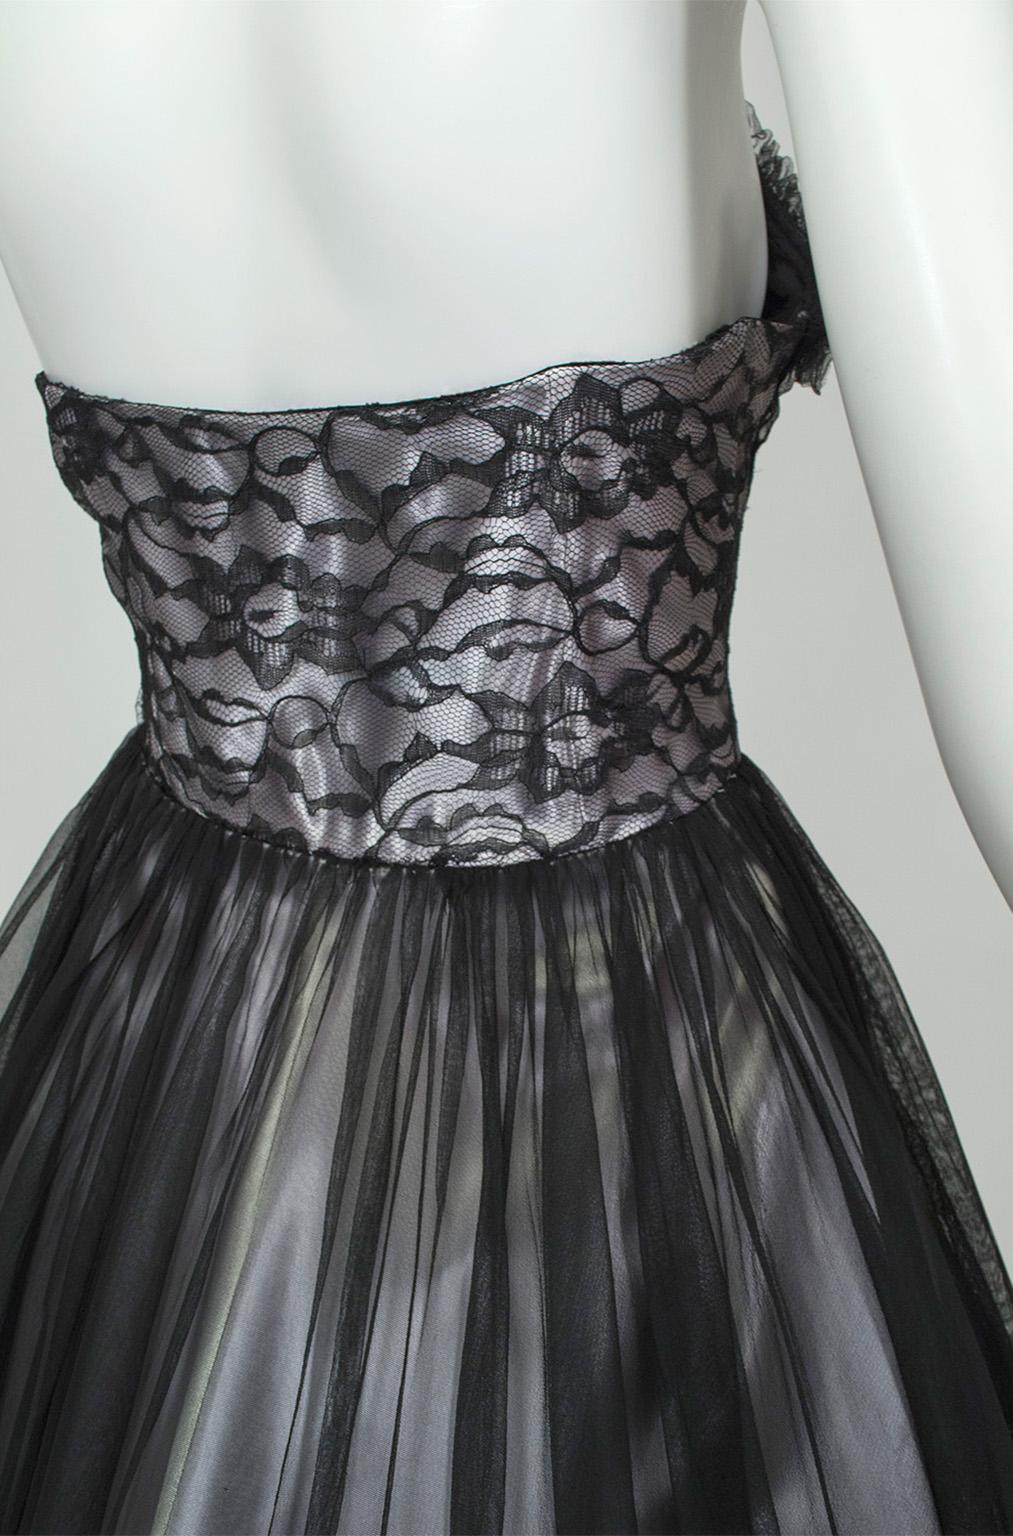 Black and Silver *Larger Size* Ombré New Look Strapless Party Dress – L, 1950s For Sale 1